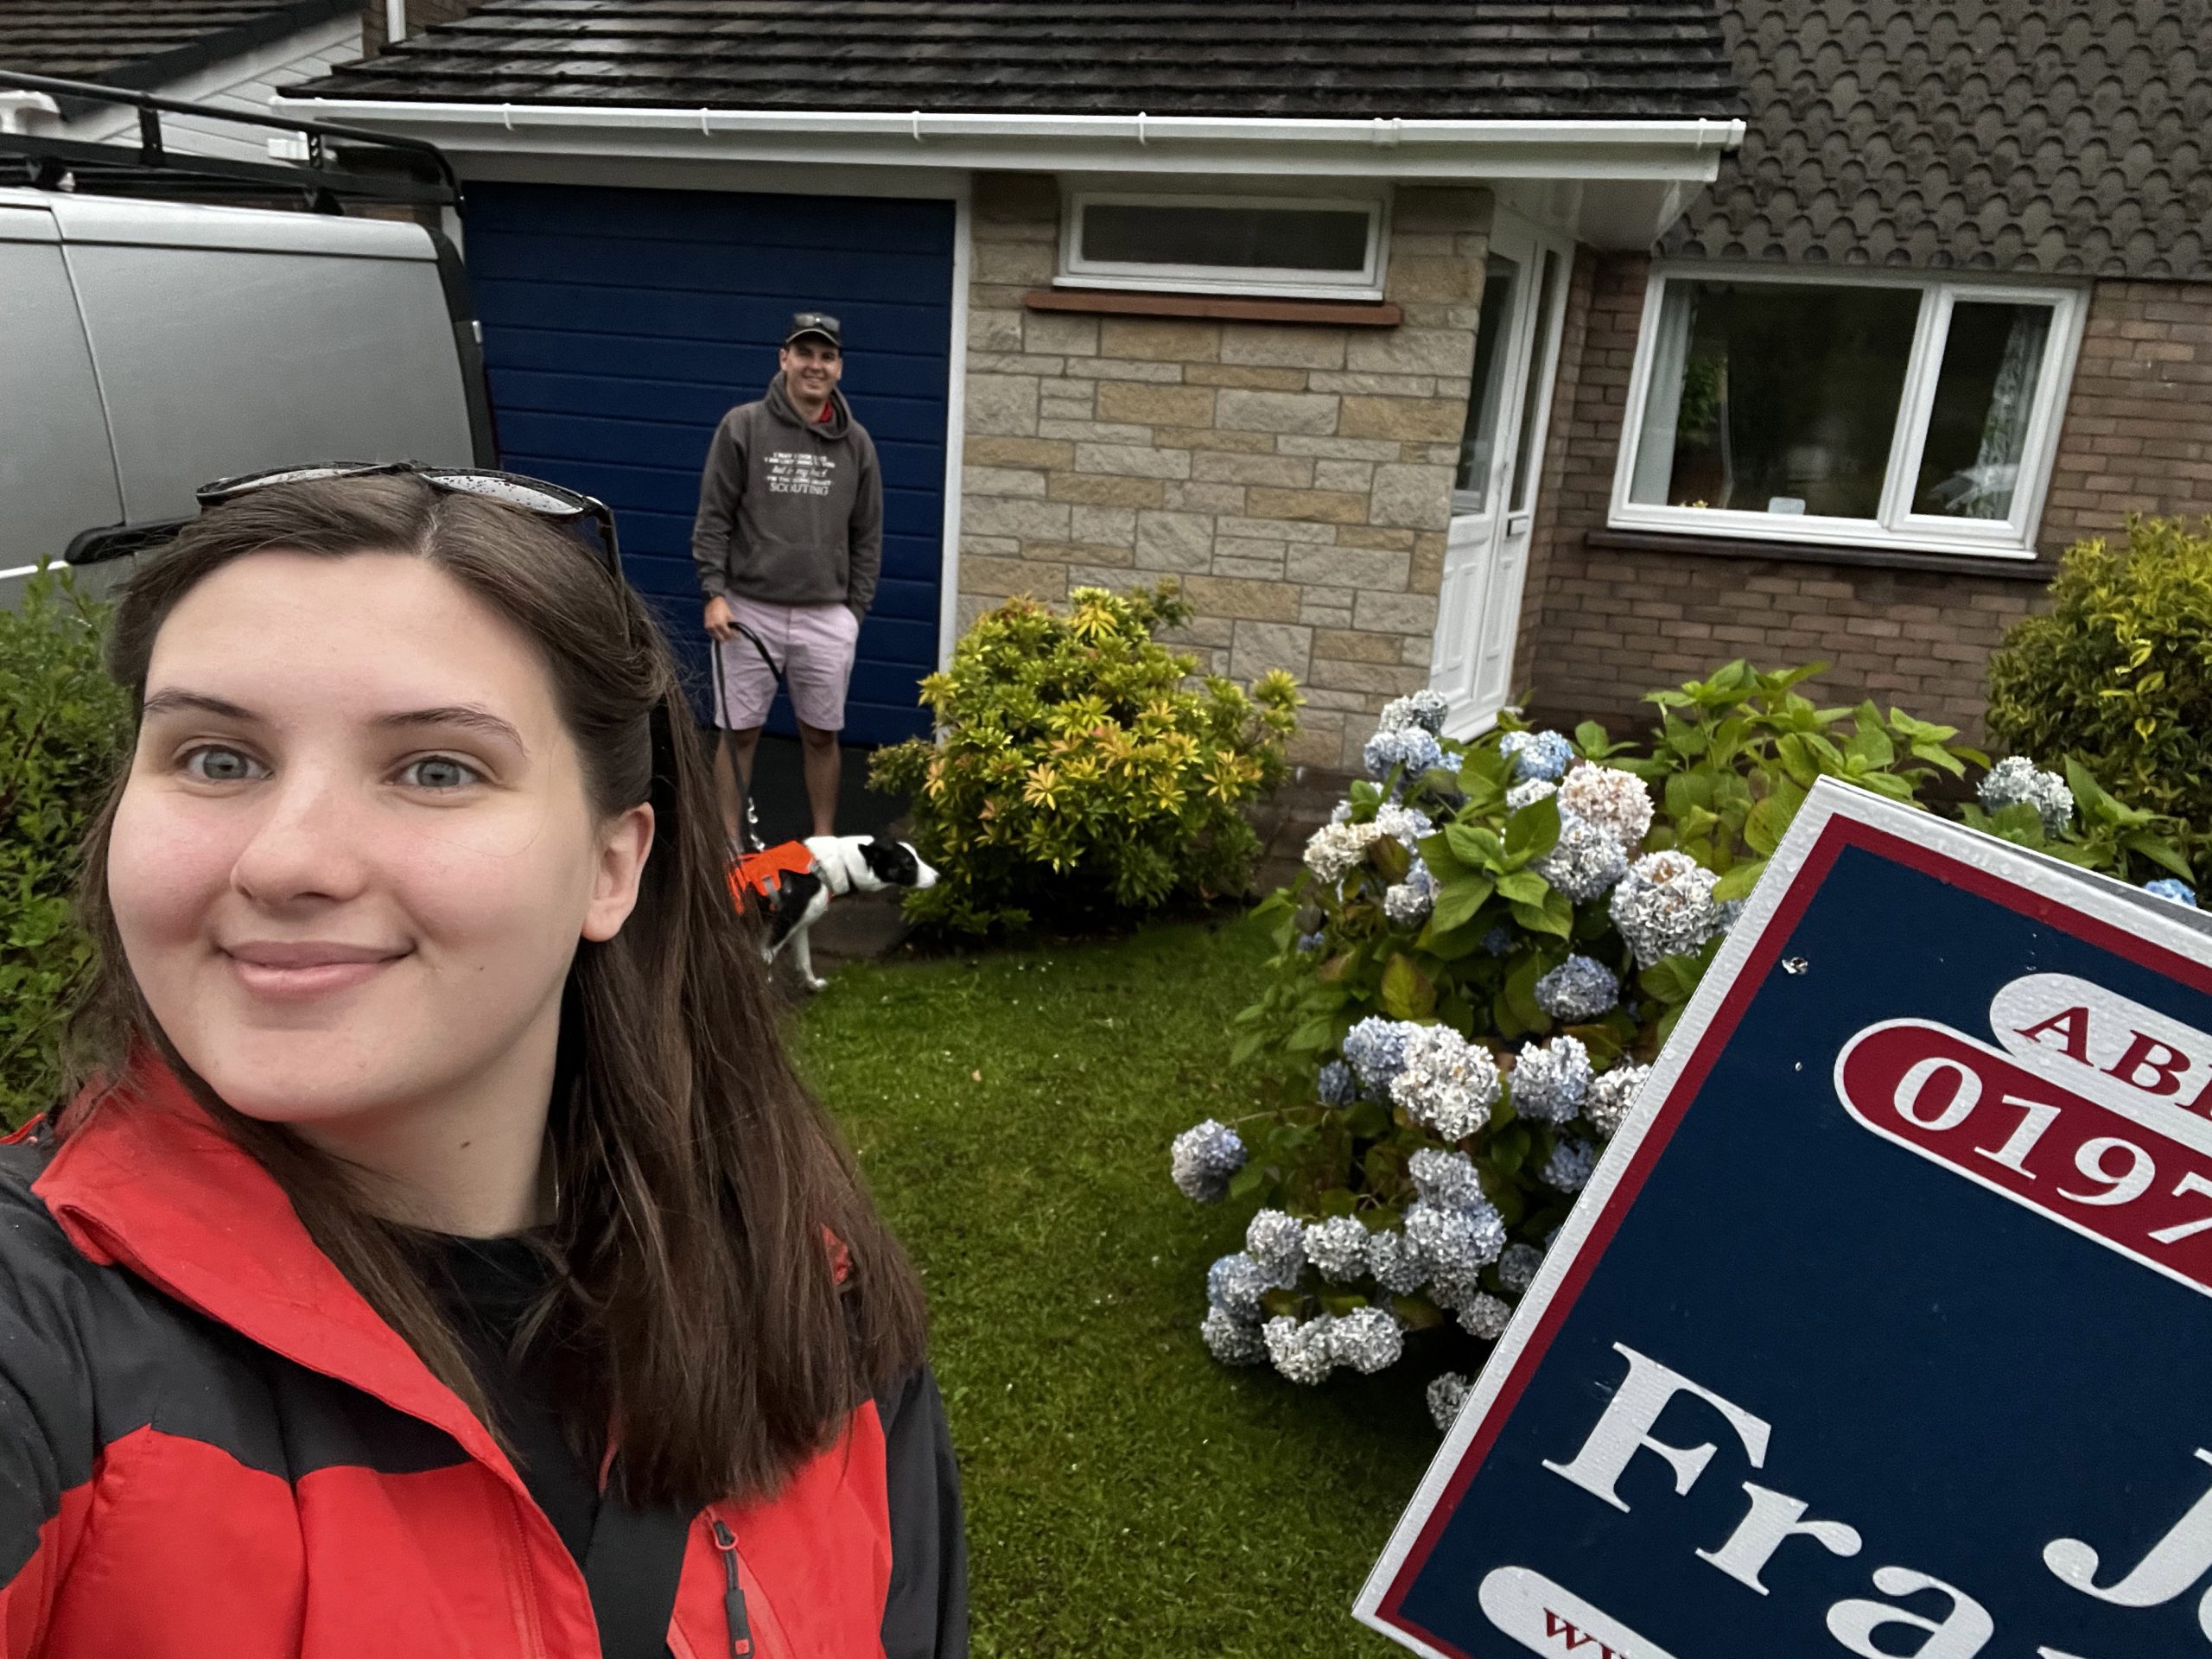 "I'm 23 and Just Bought My First House with £30,000 Saved in Three Years – Here's How I Did It